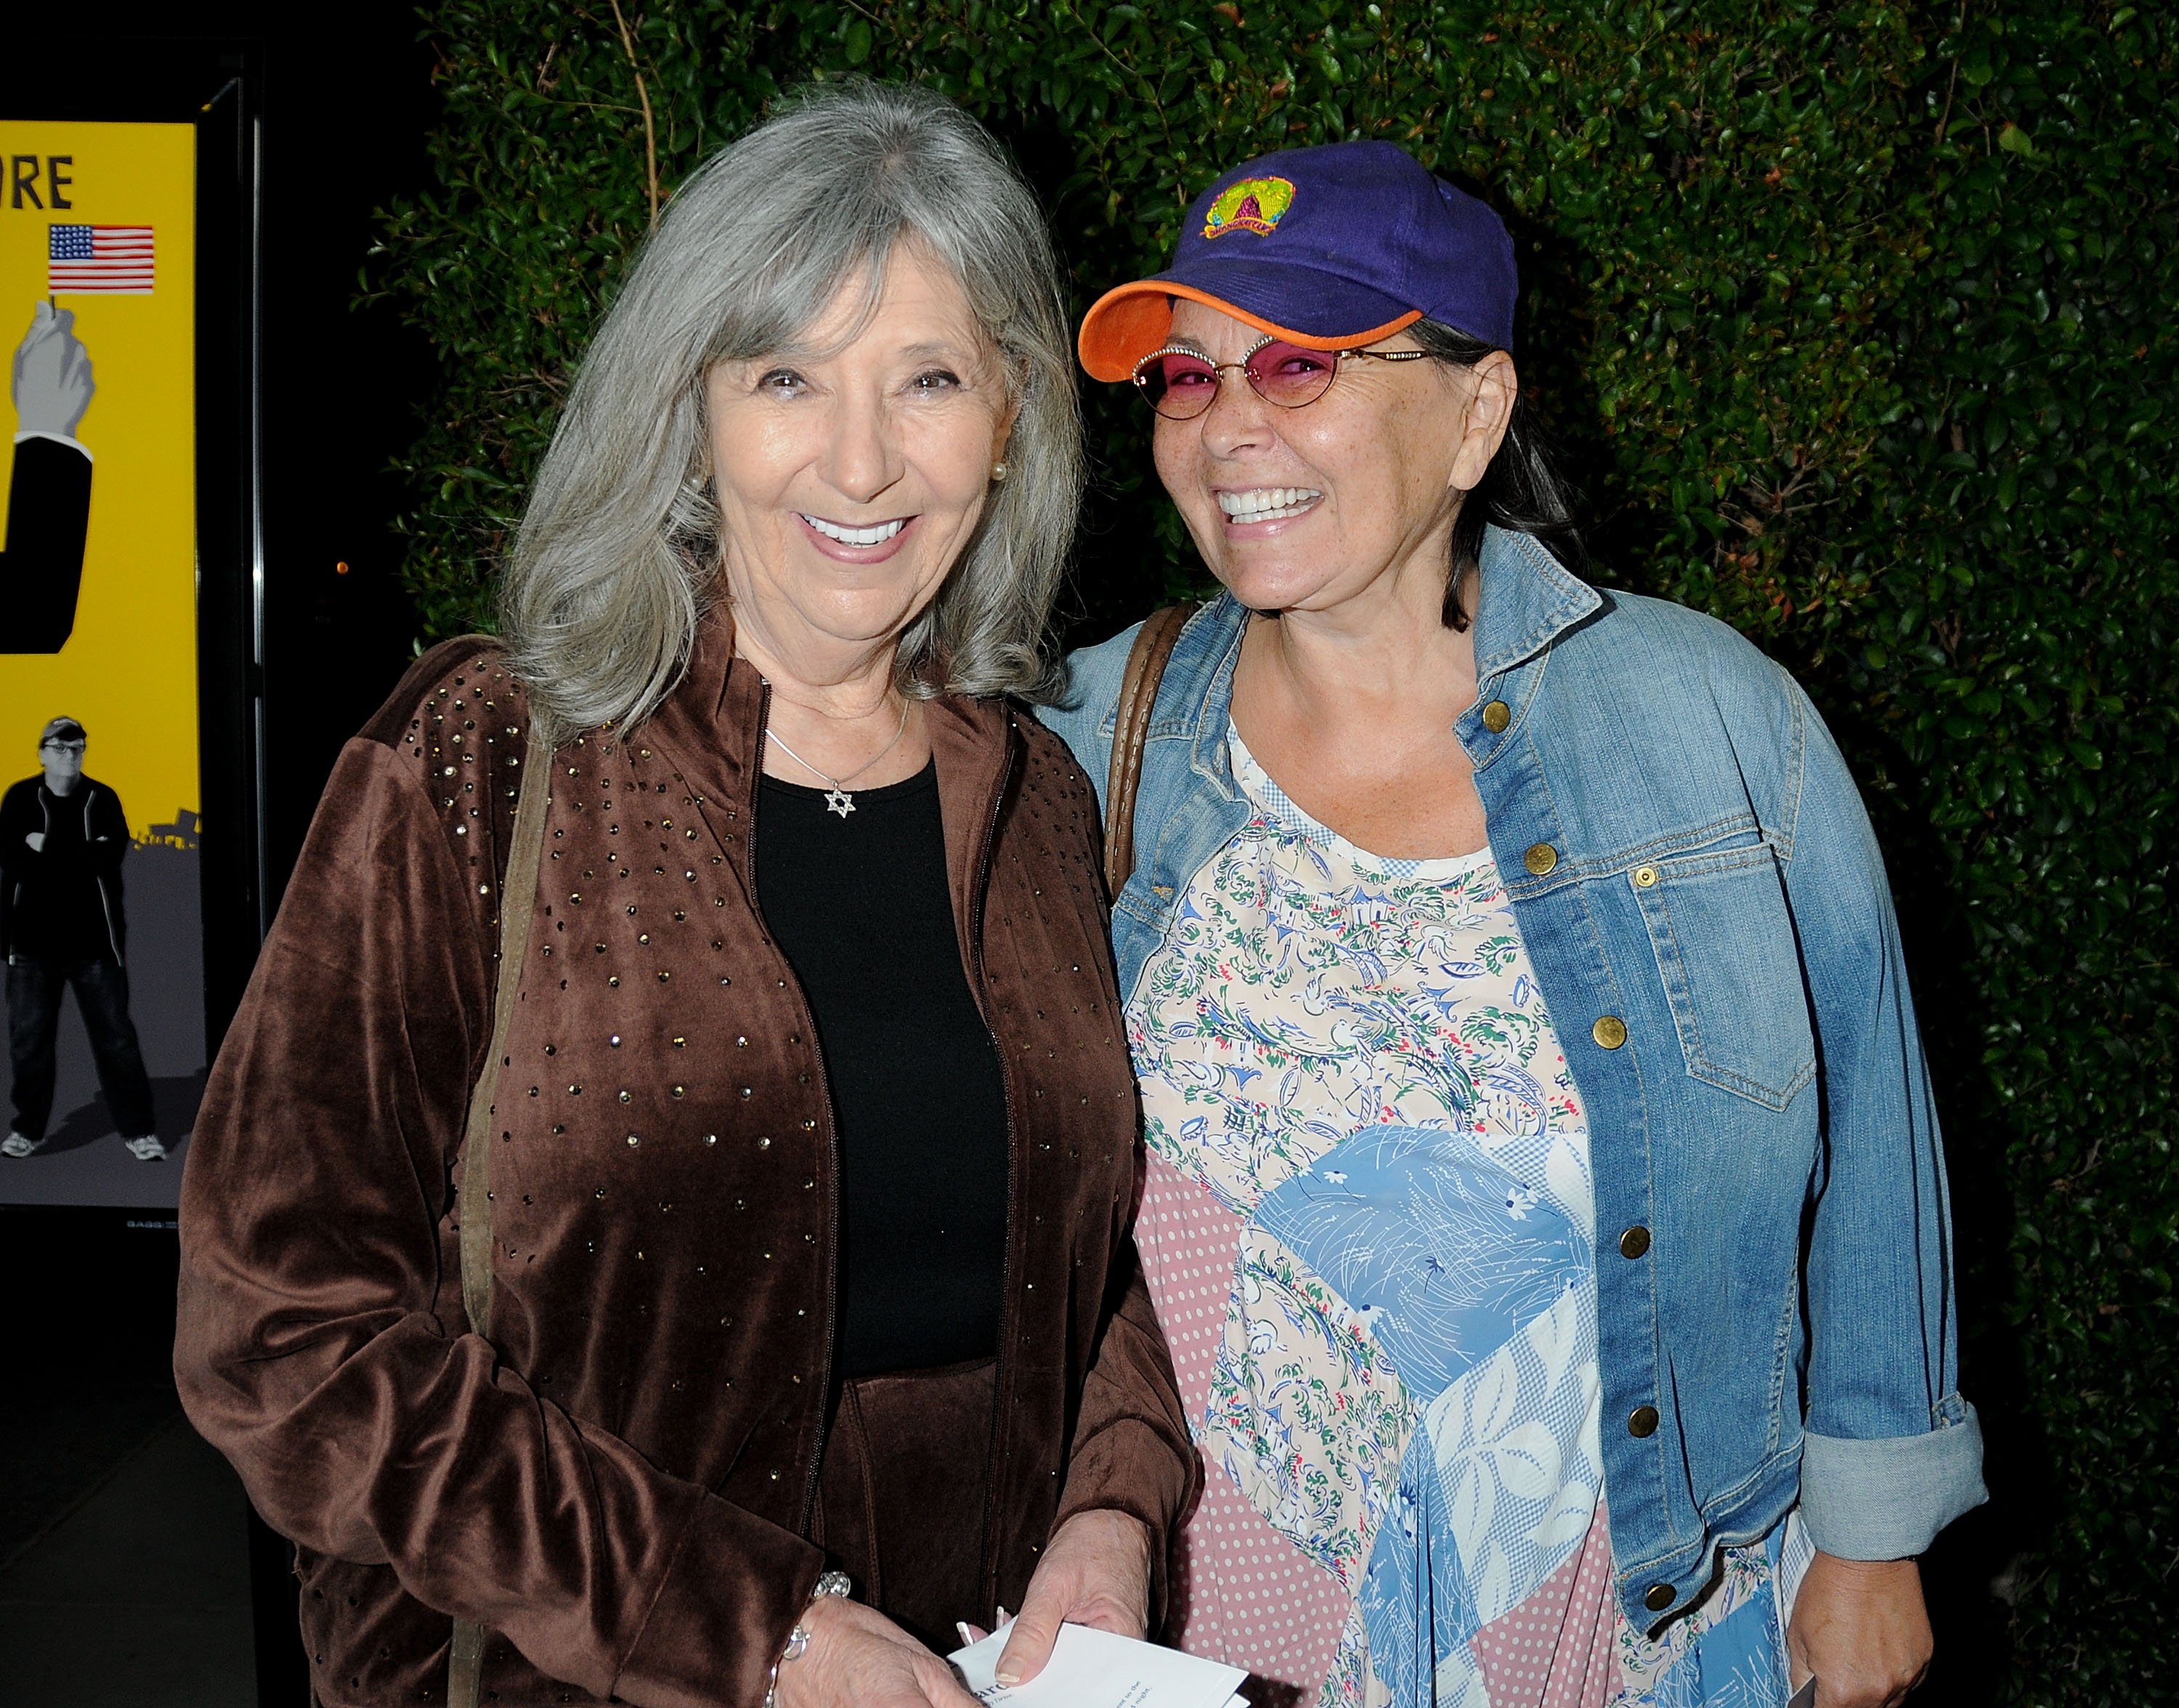 Roseanne Barr and her mother Helen at the Los Angeles Premiere of "Capitalism: A Love Story" on September 15, 2009 | Source: Getty Images